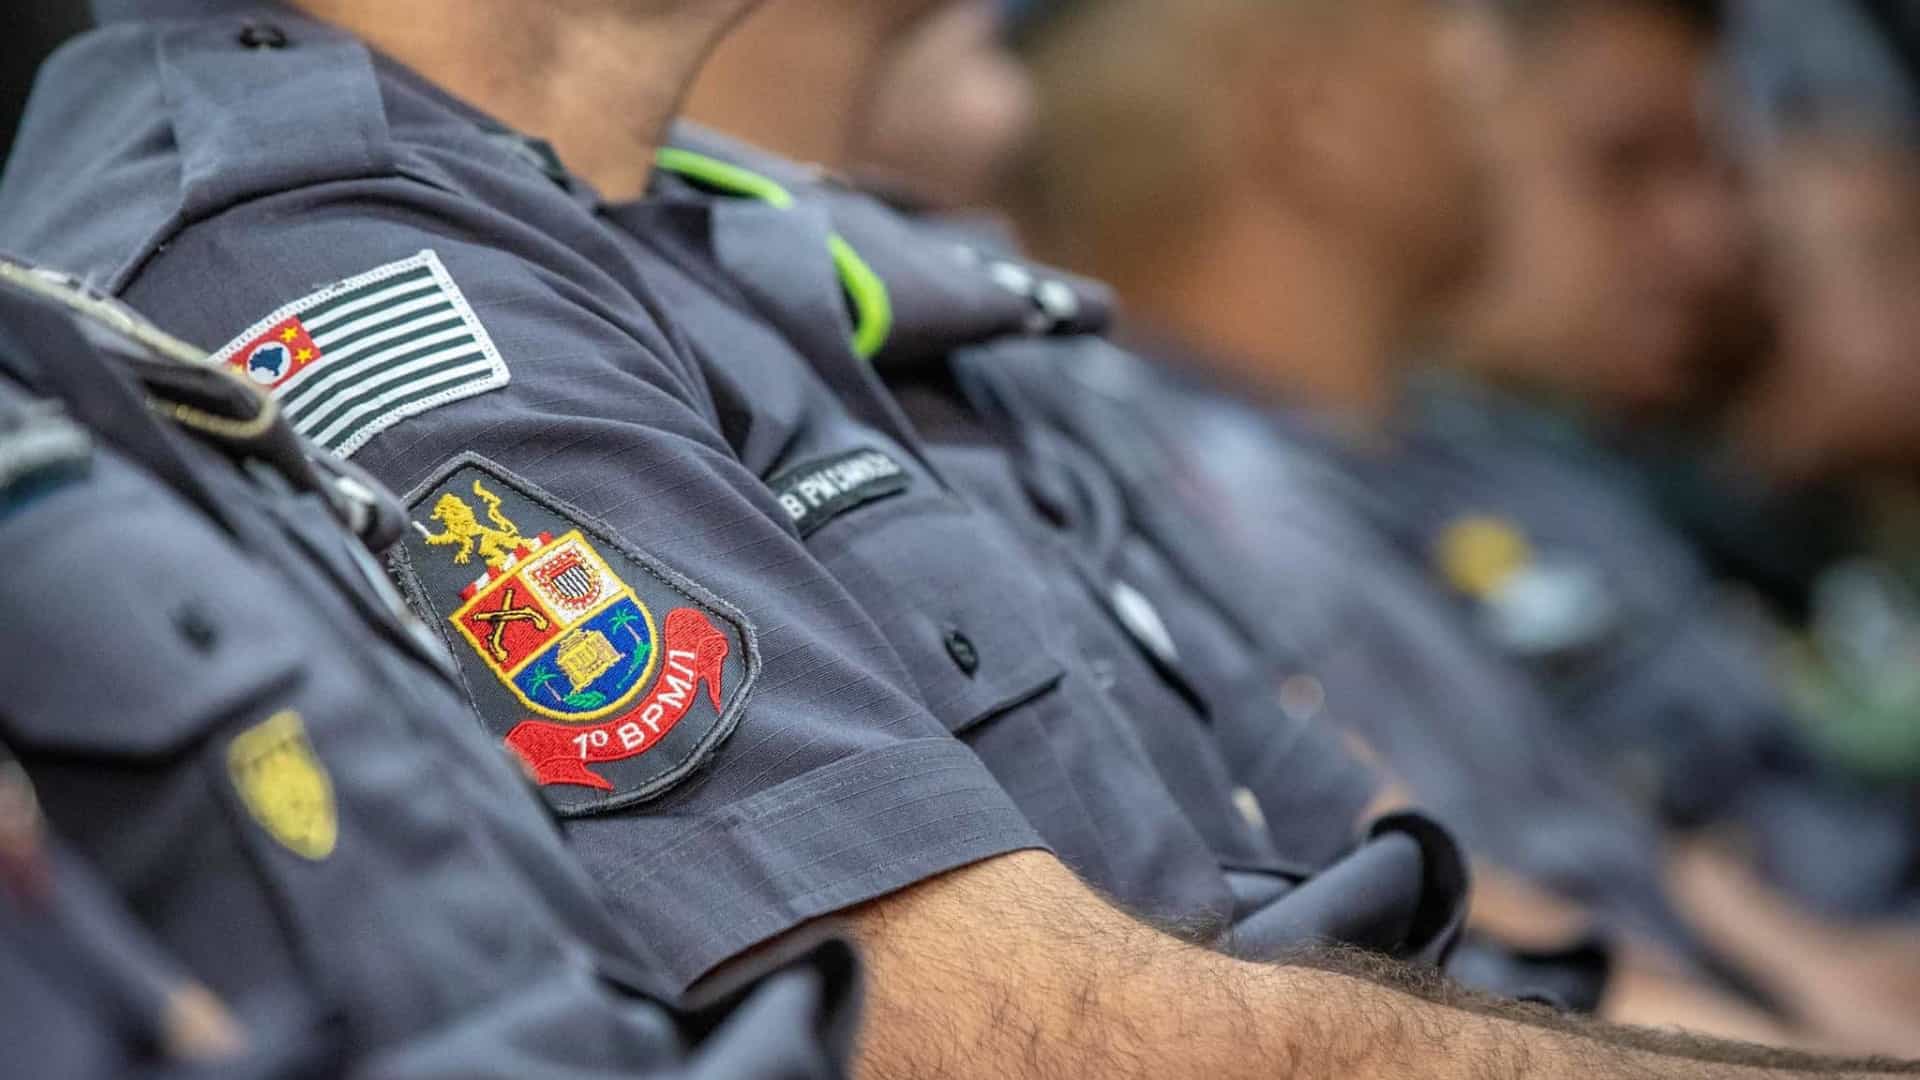 According to data from the João Doria management published in the Federal Gazette, the number of "deaths due to police intervention" involving the State Police (PM) increased by 54.6 percent in April (most recent data available), with the quarantine against the coronavirus in force in the state.